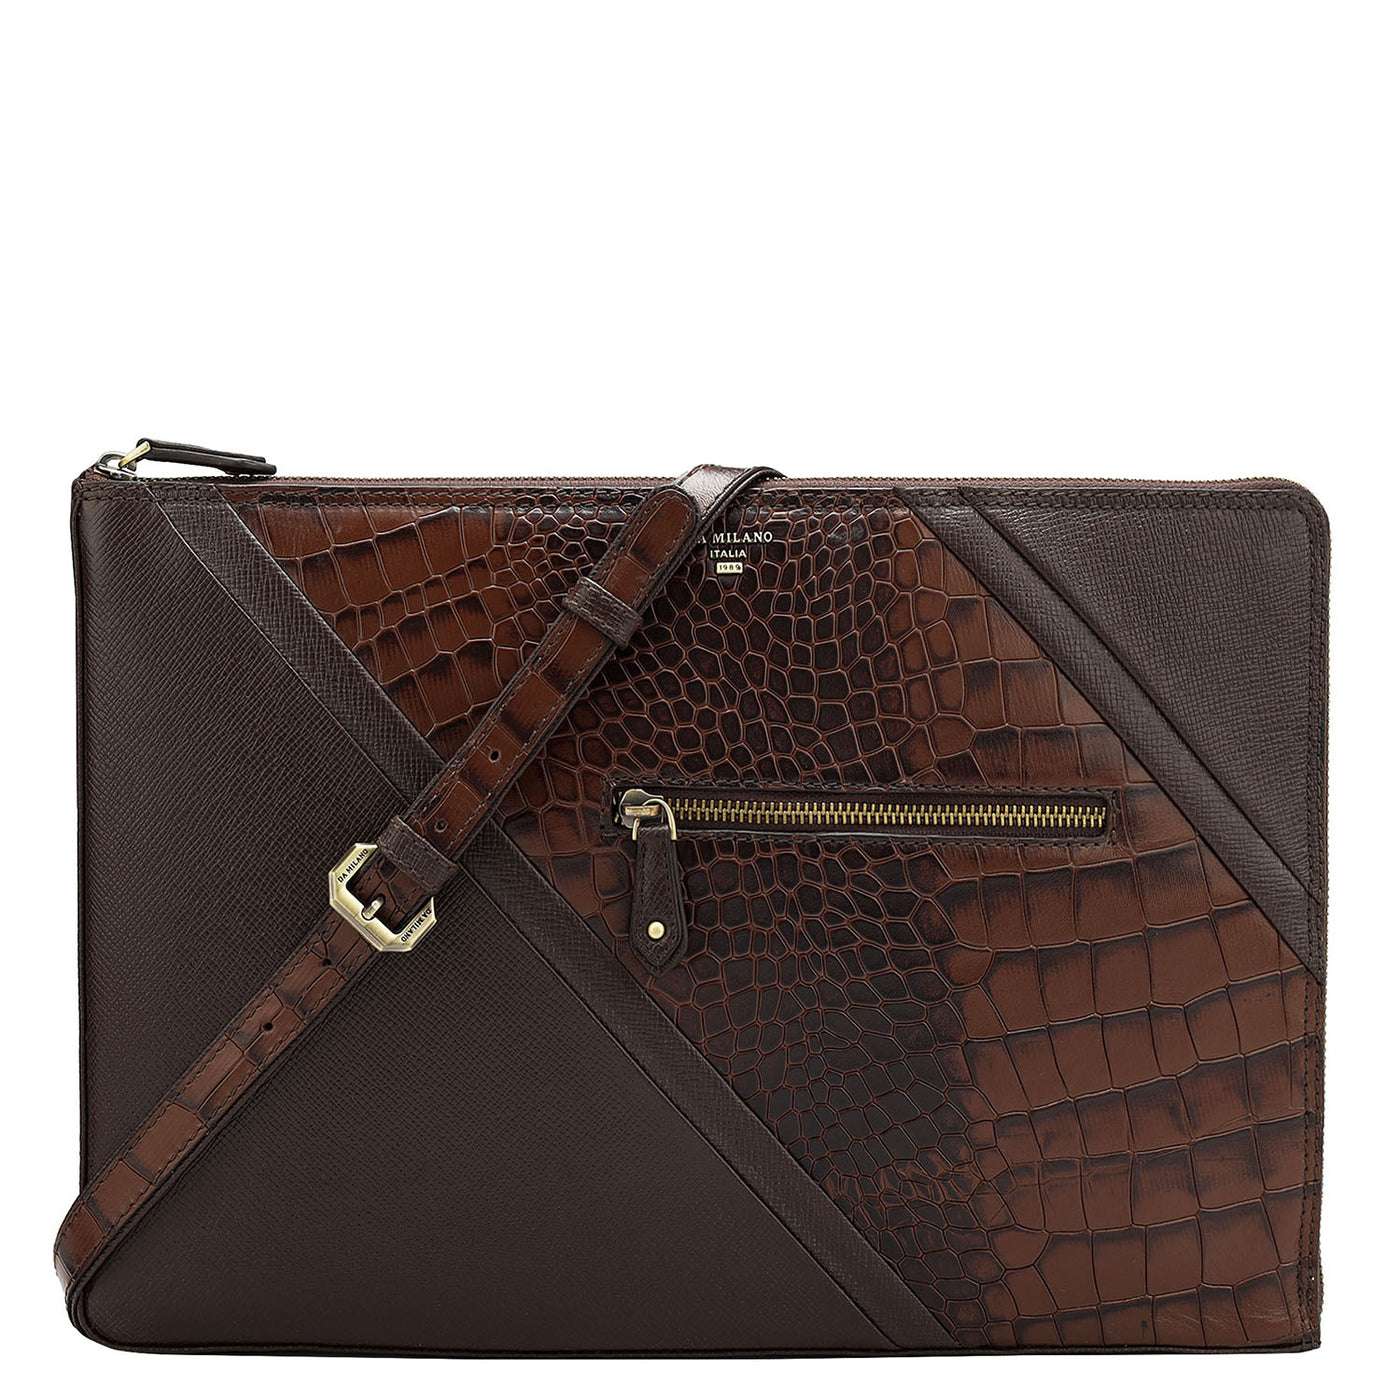 Brown Croco Franzy Leather Laptop Sleeve - Upto 15"